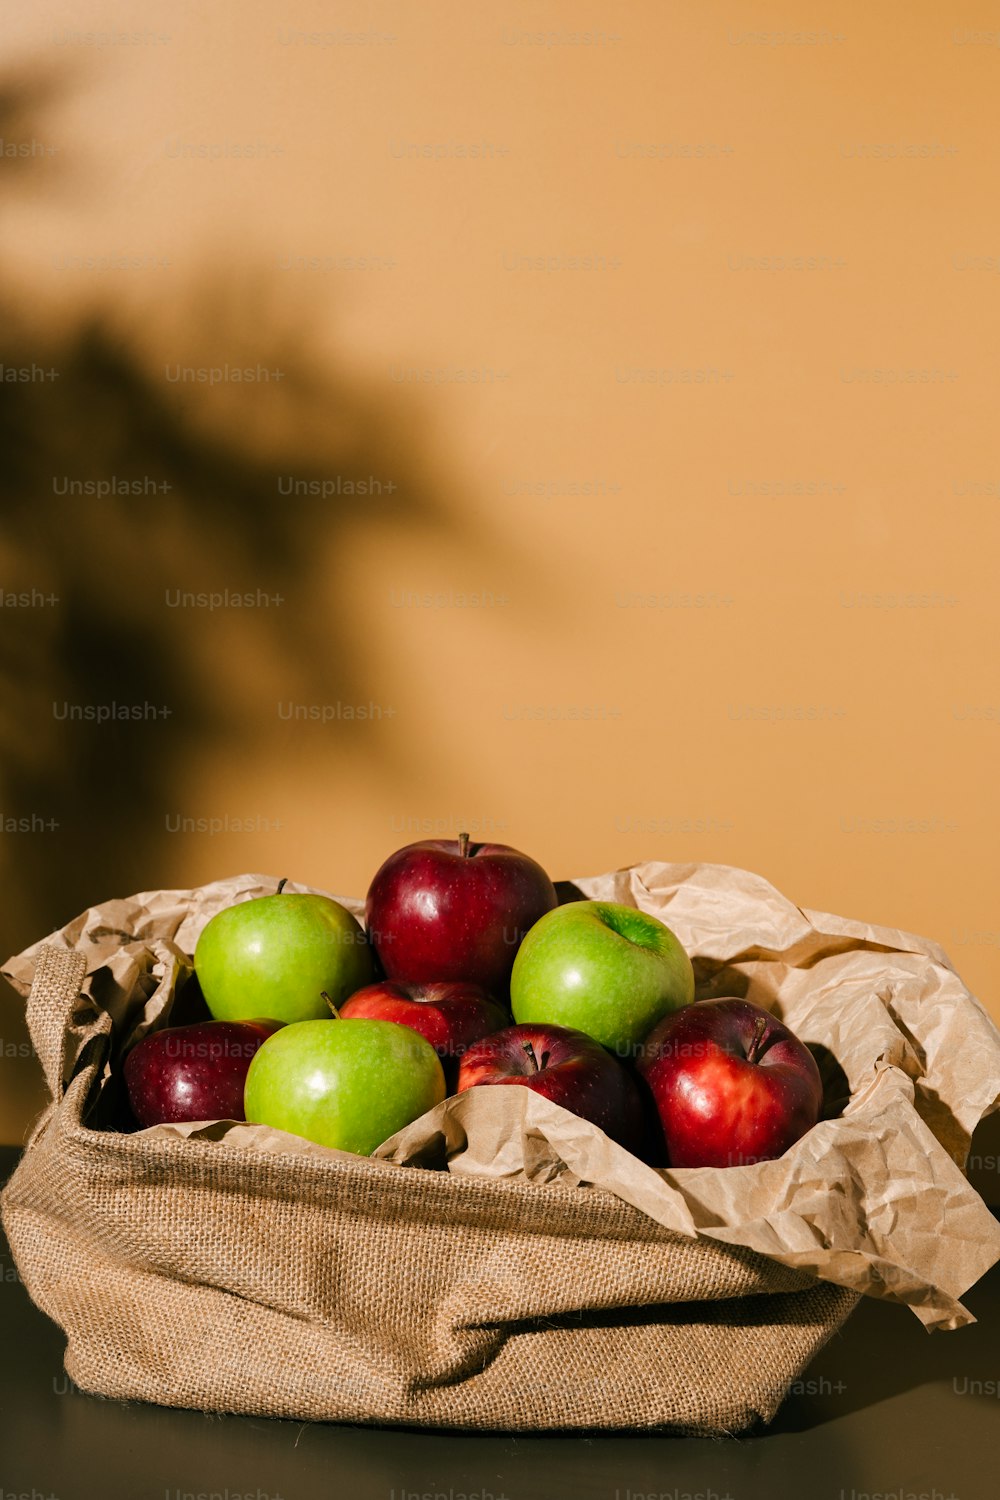 a bag full of apples sitting on a table